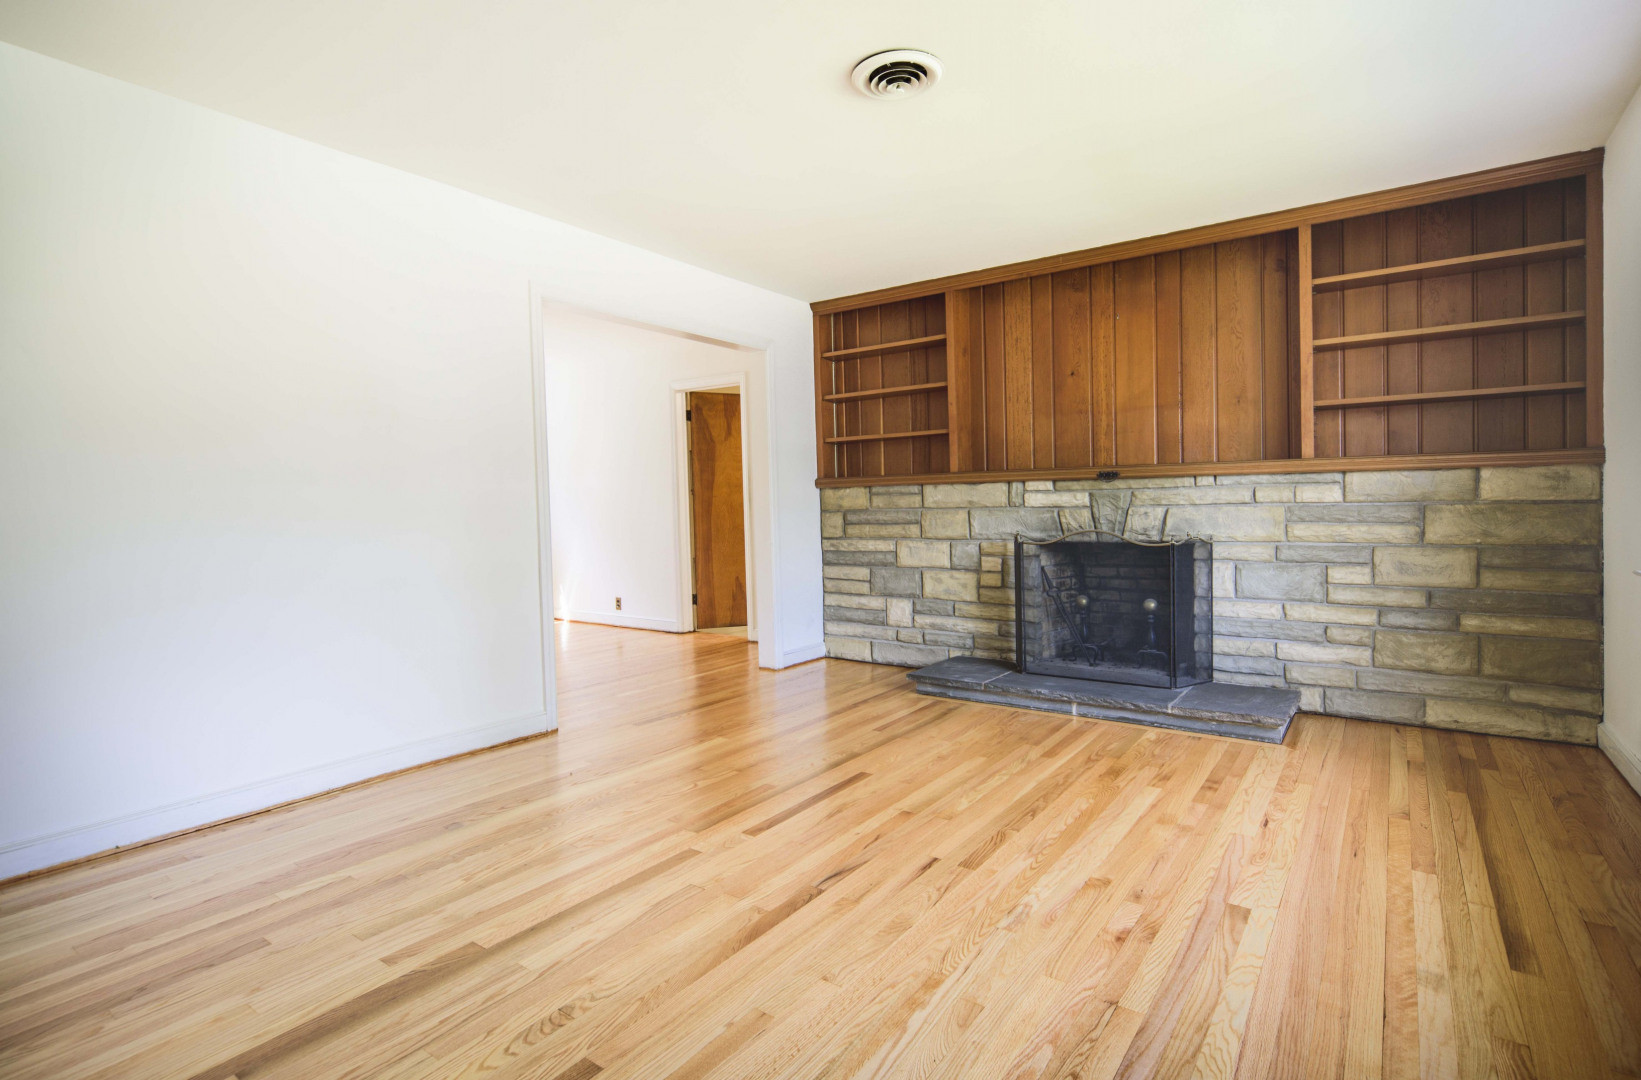 30 Awesome Hardwood Floor Refinishing Fairfield Ct 2024 free download hardwood floor refinishing fairfield ct of 6 caldwell avenue stamford ct for sale william pitt sothebys realty for 14868164 4 006 233896 dsc8773 5152636